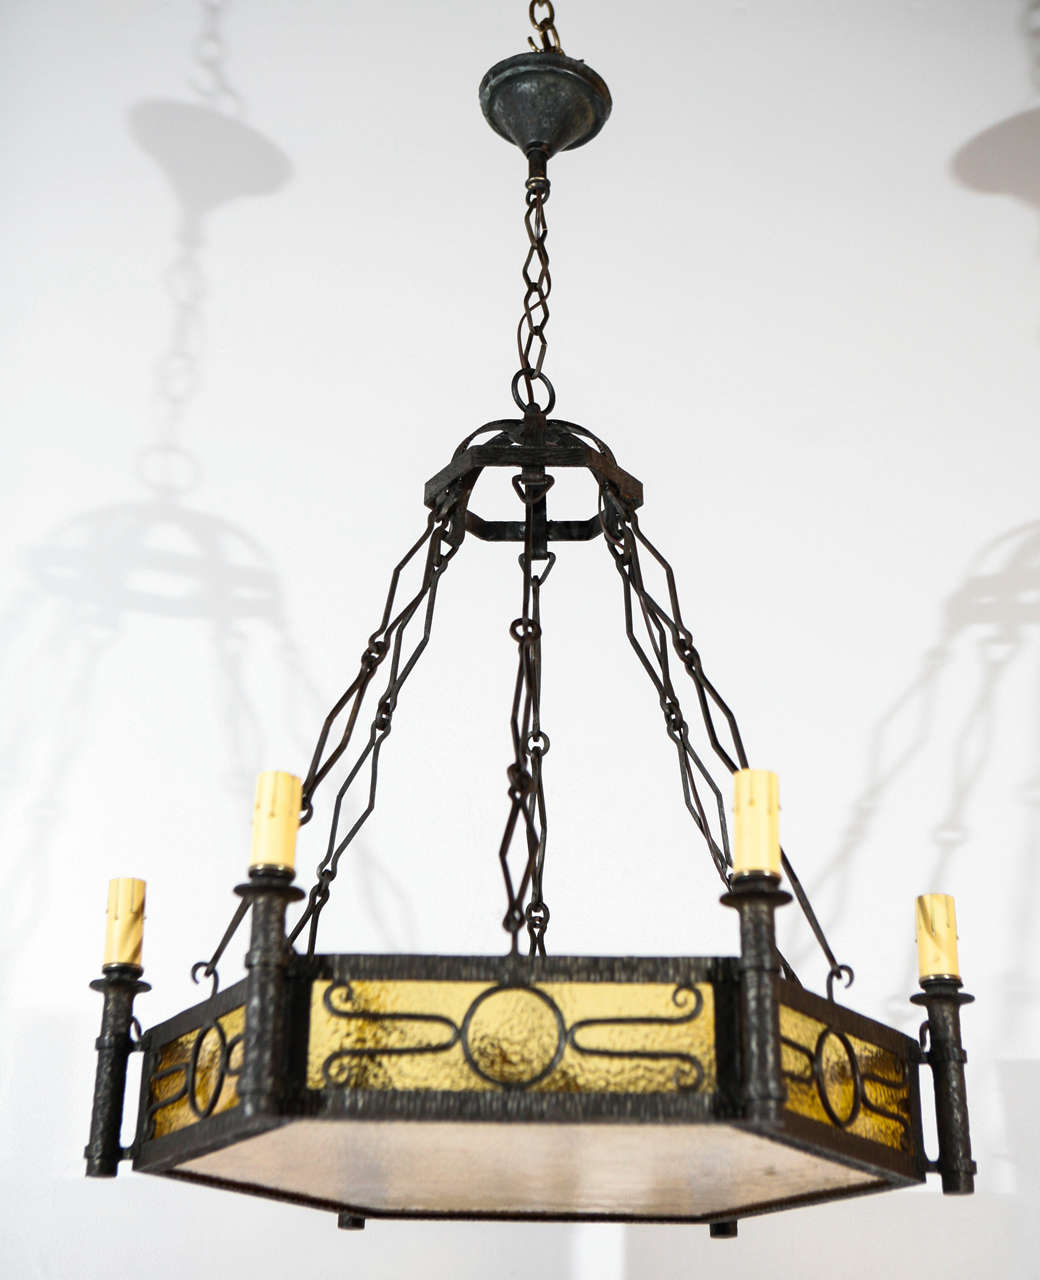 Cast iron French chandelier newly rewired with six standard sockets, each of which can take a 75 watt bulb. New glass, glass can be sandblasted. Two available.